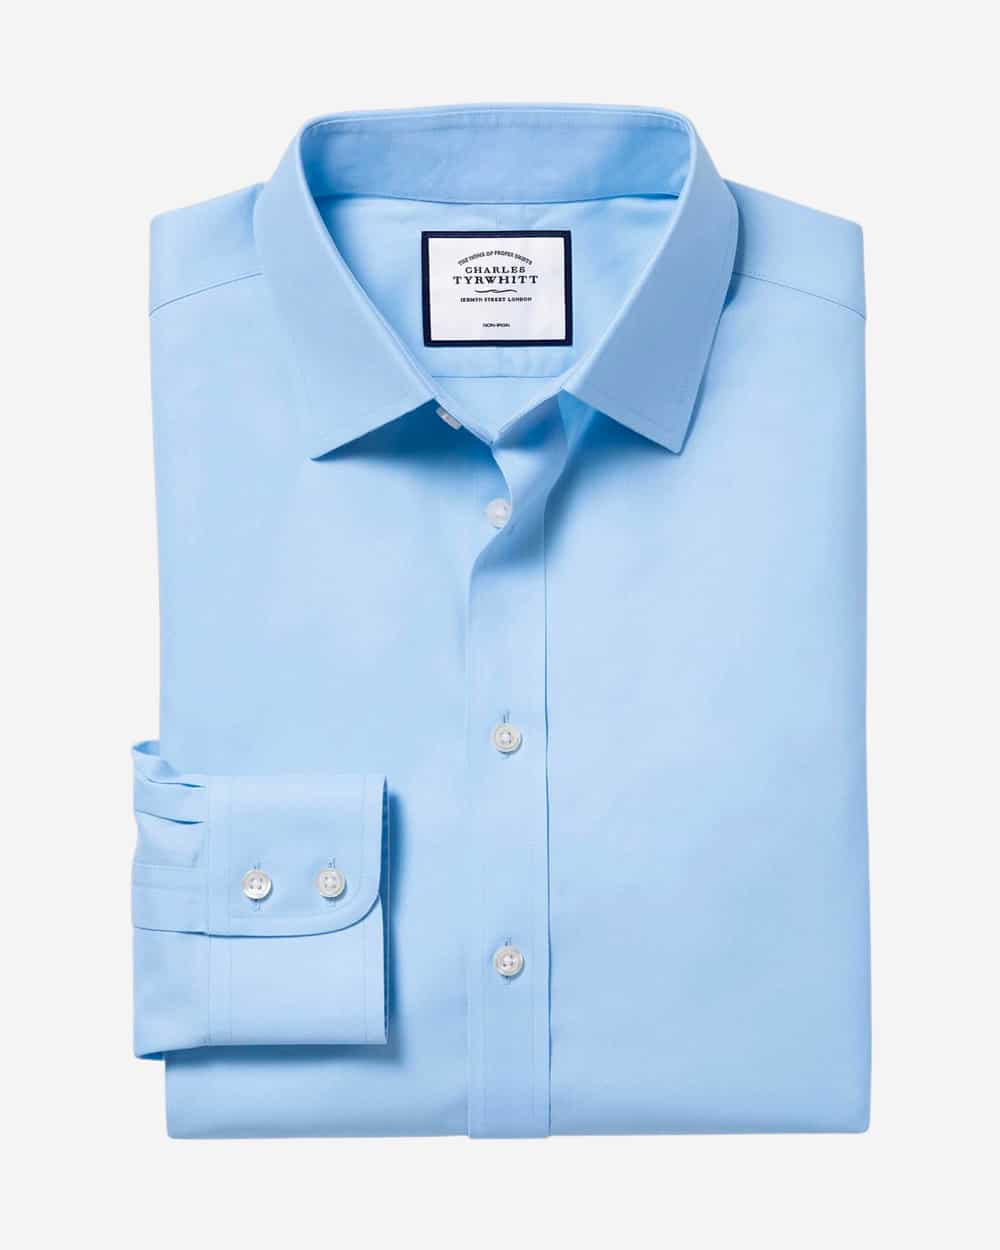 37 Luxury Shirt Brands All Stylish Men Should Know (2023)